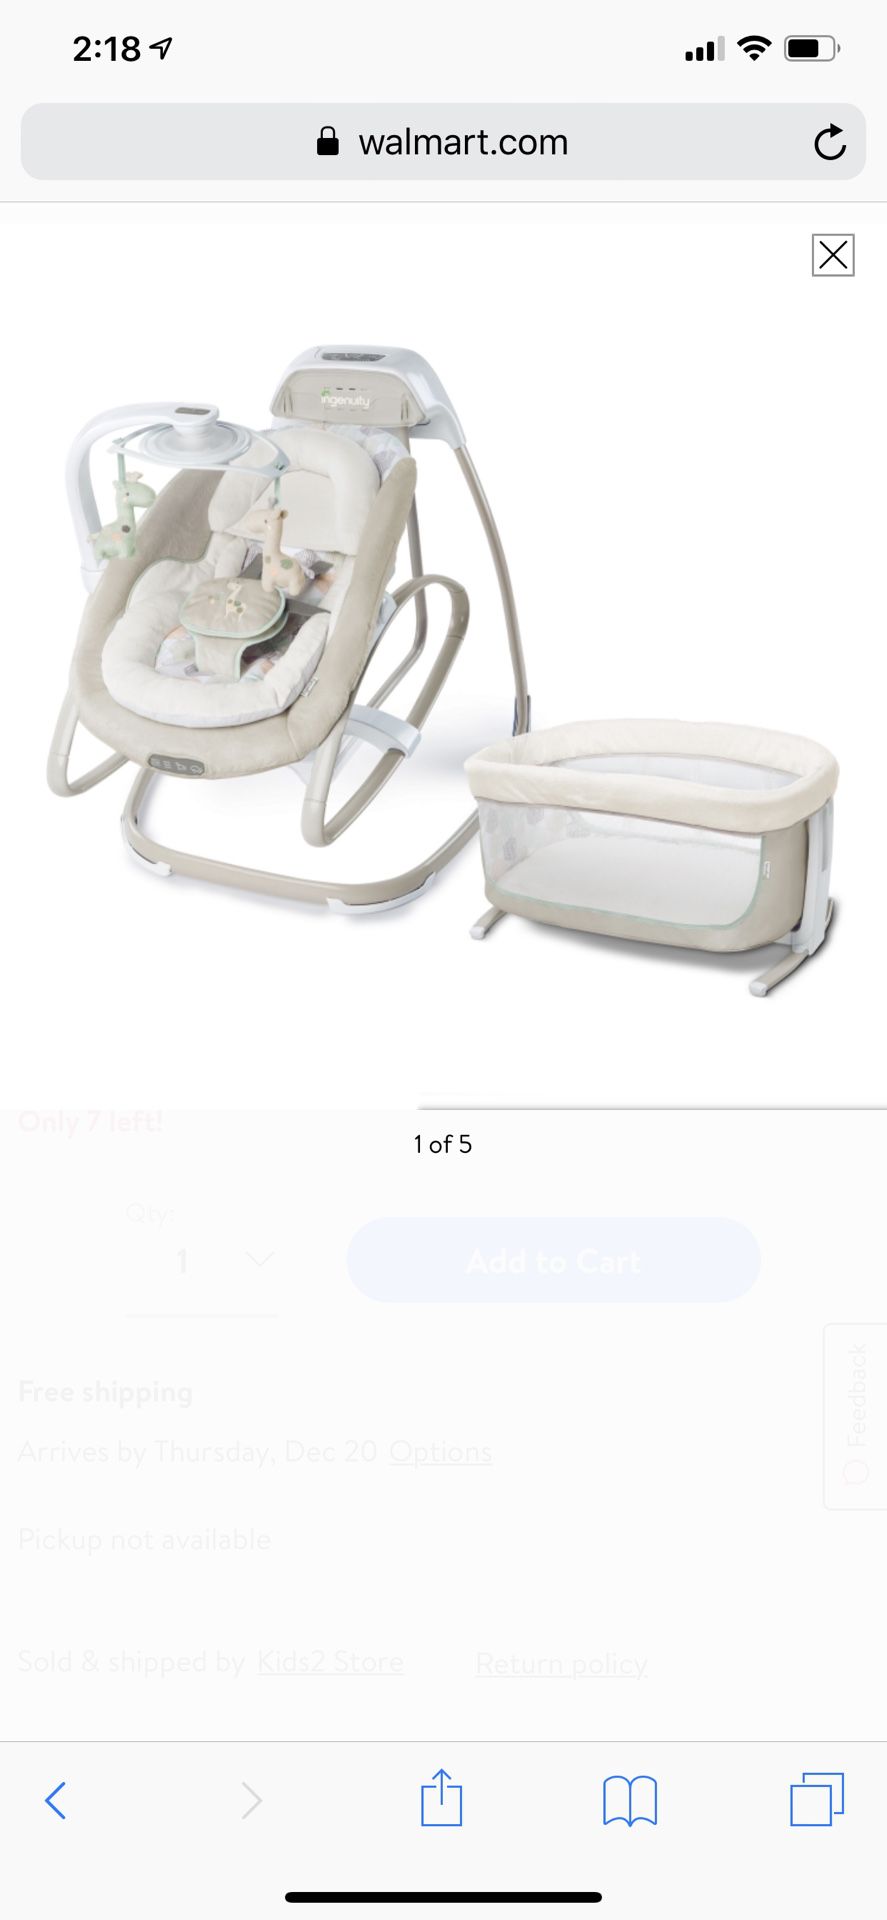 Baby items for sale: chair, rocker, bassinet, umbrella stroller and carrier